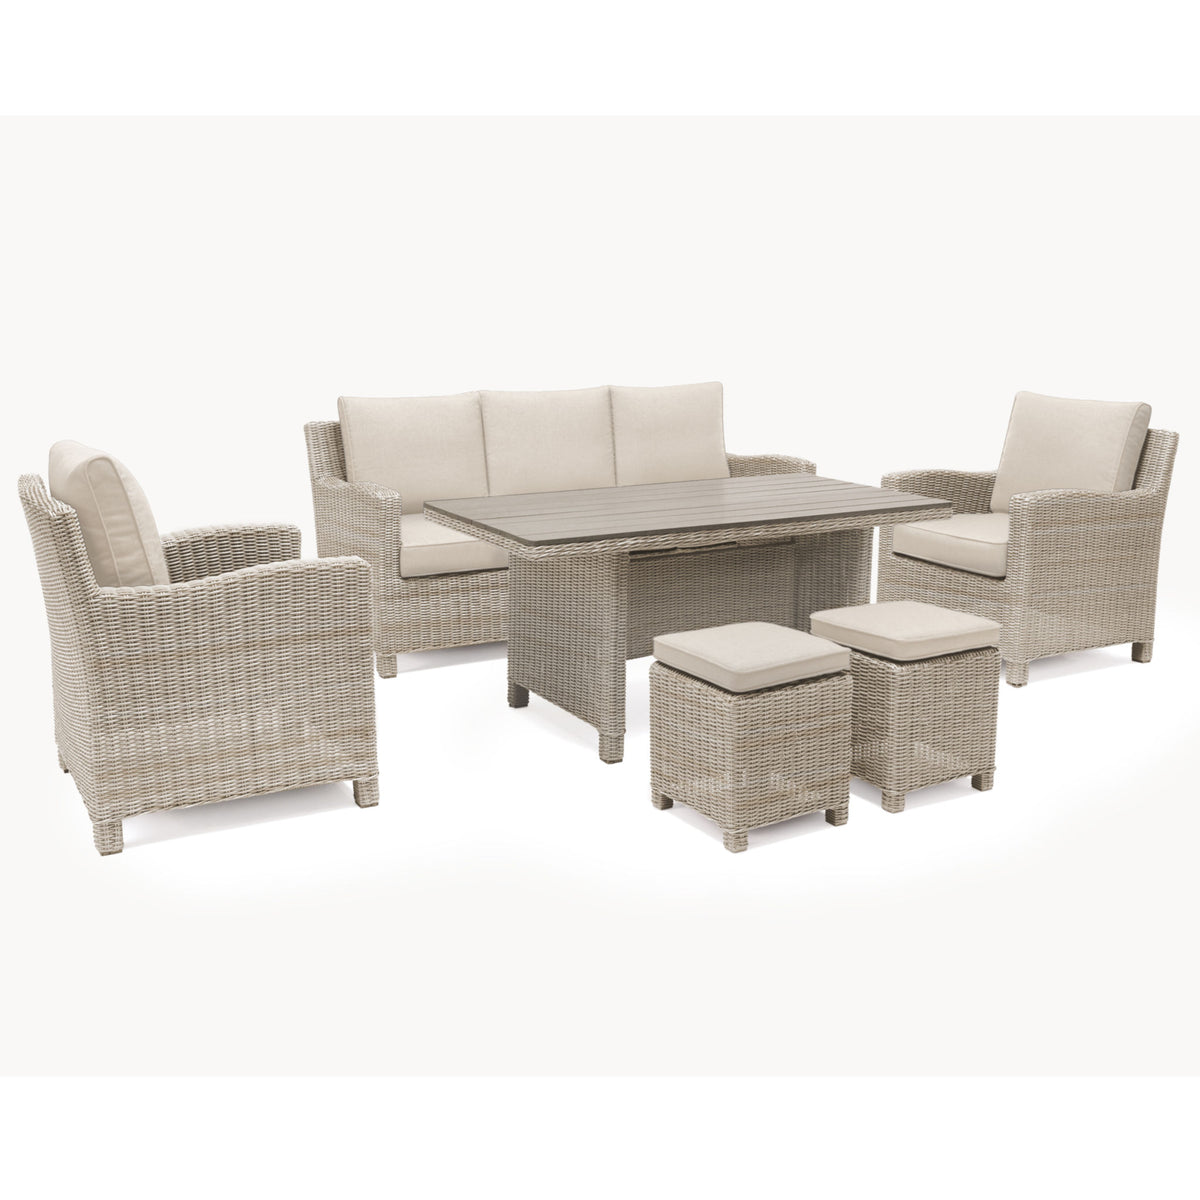 Kettler Palma Oyster Wicker Outdoor Casual Dining Lounge Sofa Set with Slat Top Table